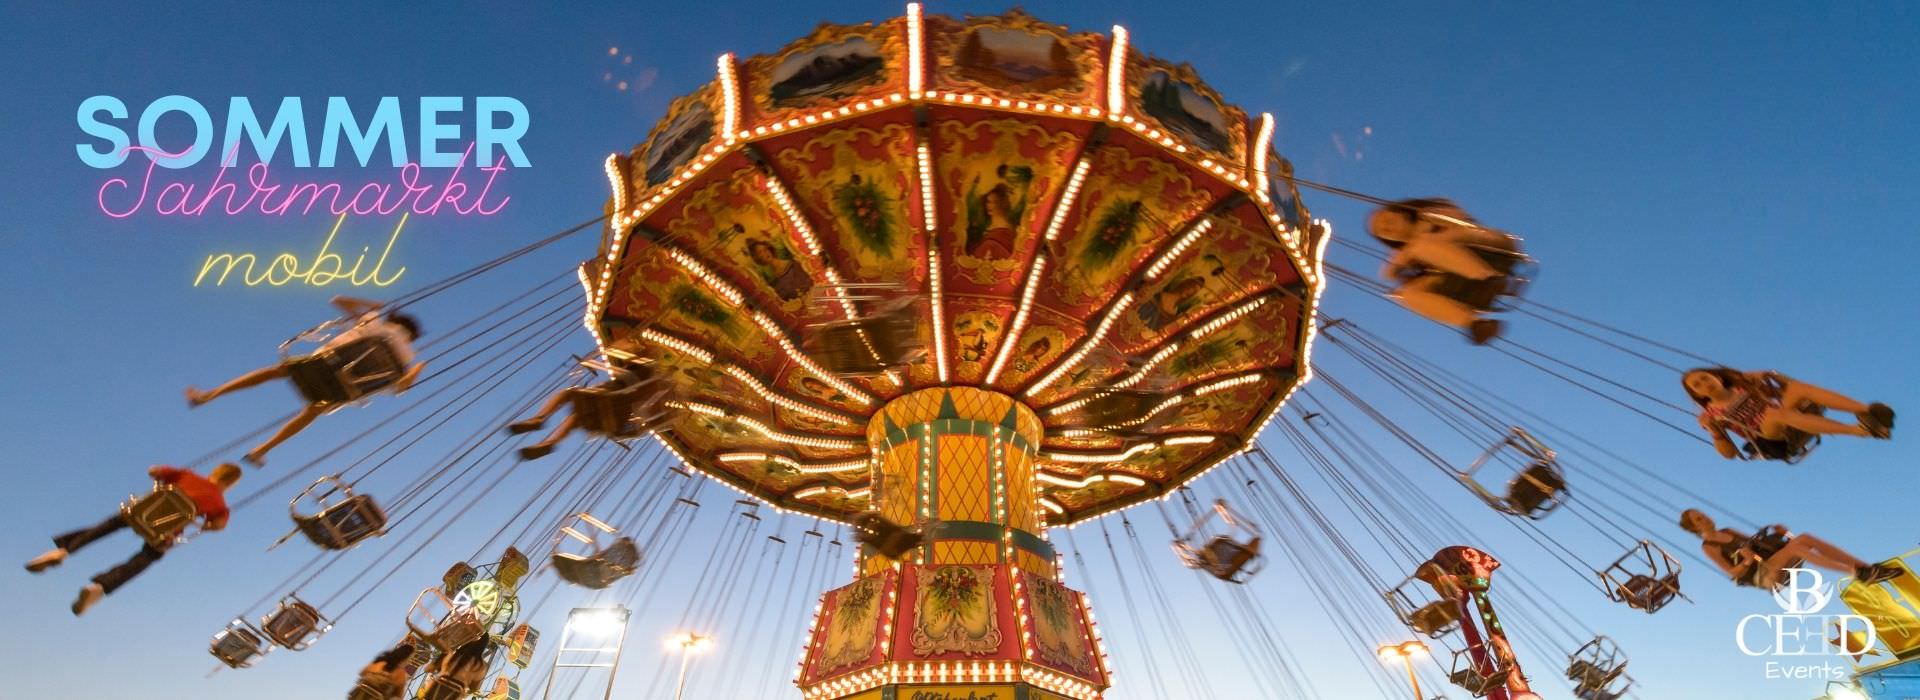 Fairground summer party - fairground feeling on the company grounds | b-ceed Events